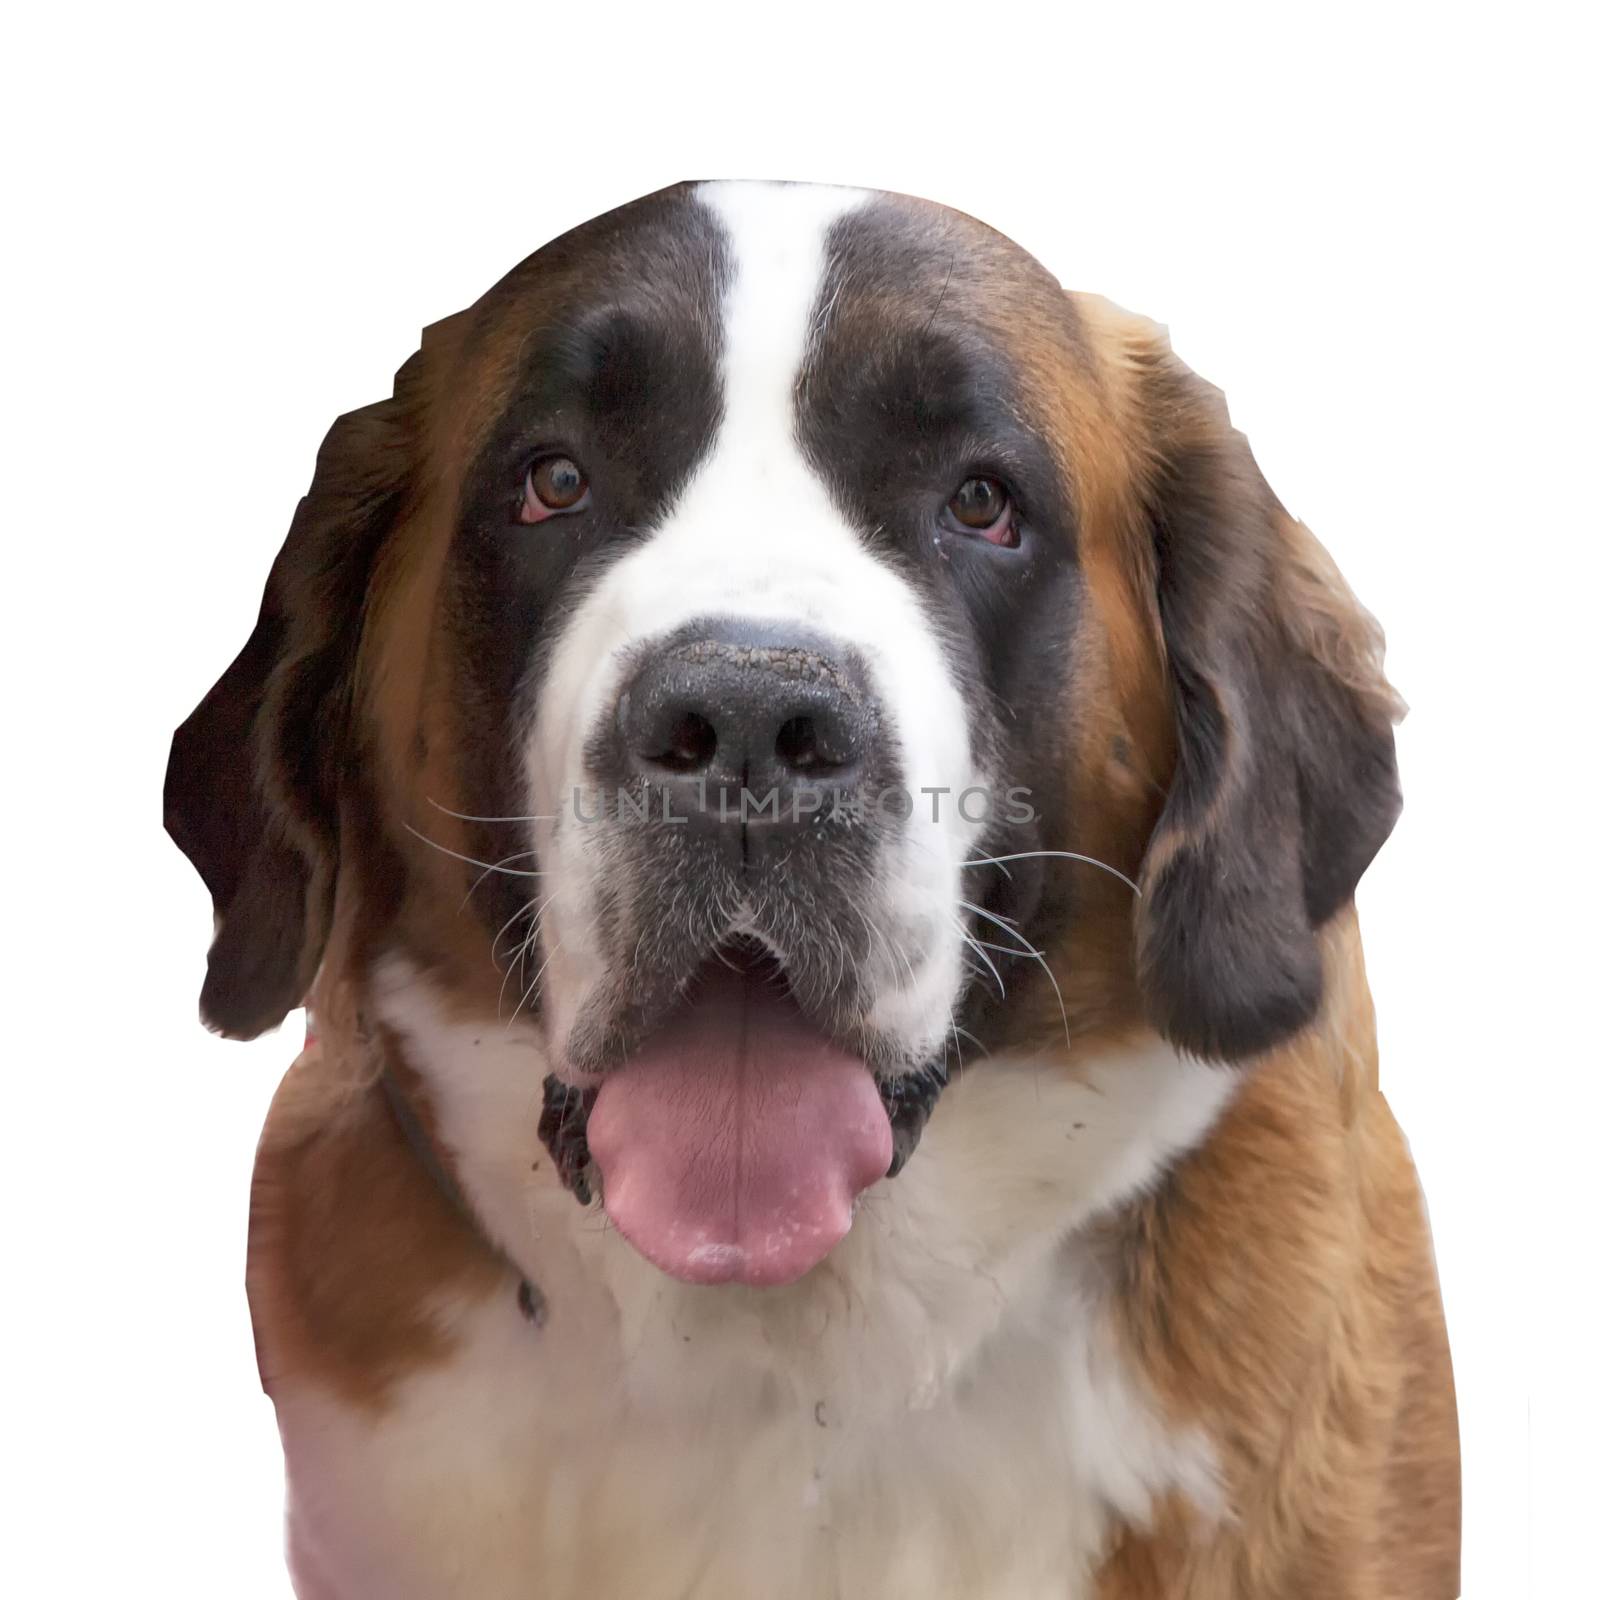 Saint Bernard Dog isolated over white, staring at the camera